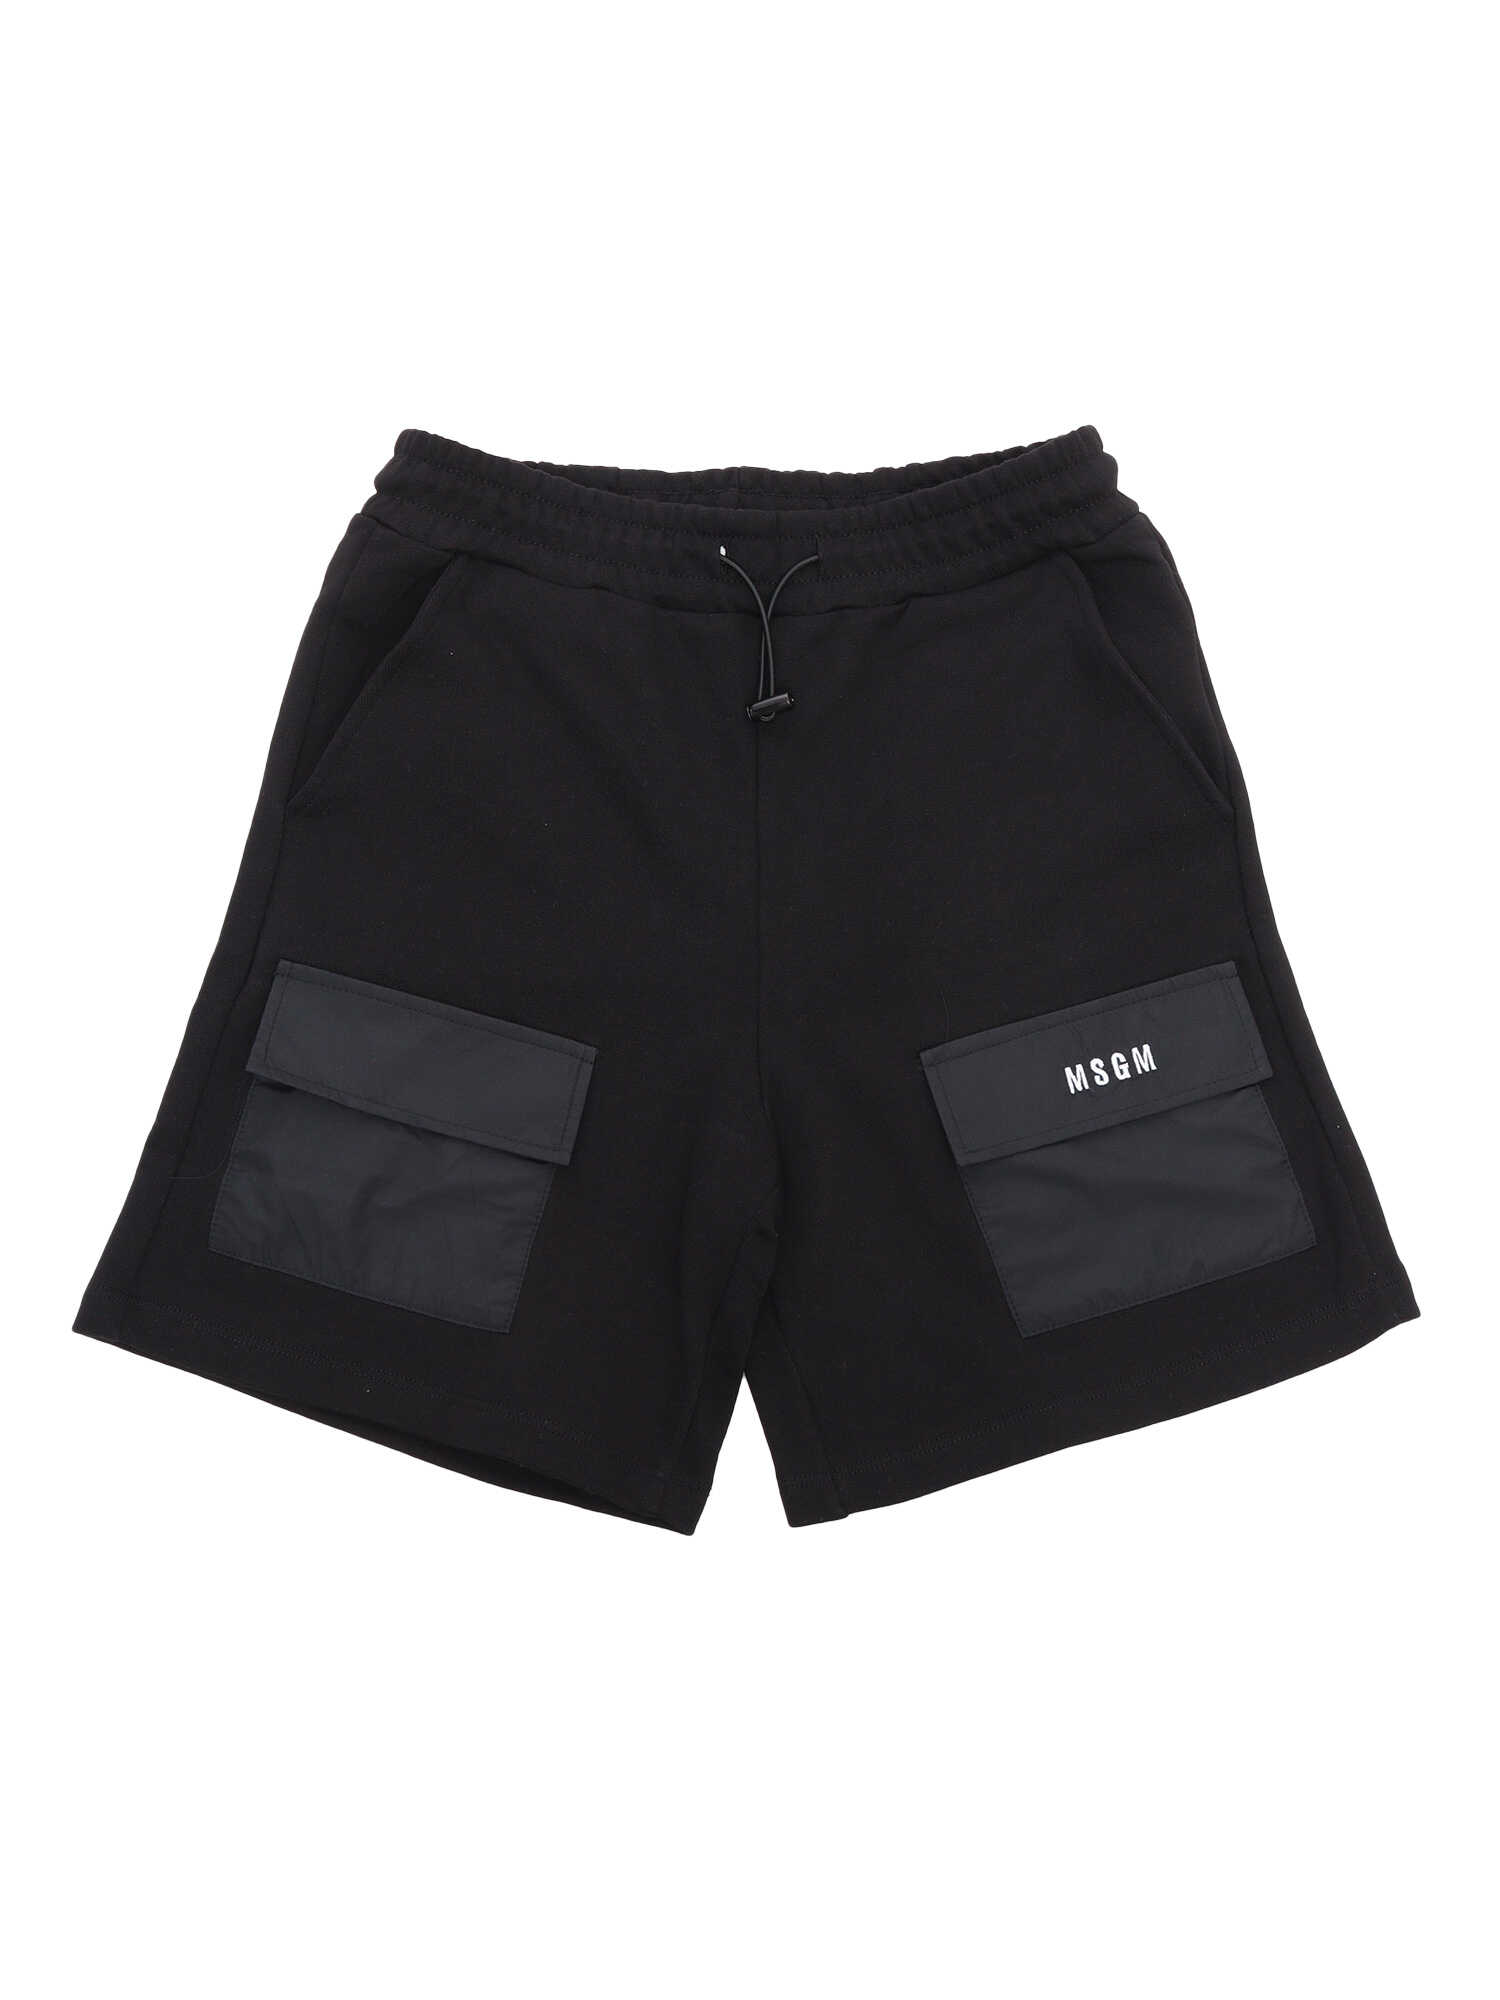 MSGM MSGM black shorts for girls with patch pockets on the front, elastic waistband with drawstring, welt pockets. Black